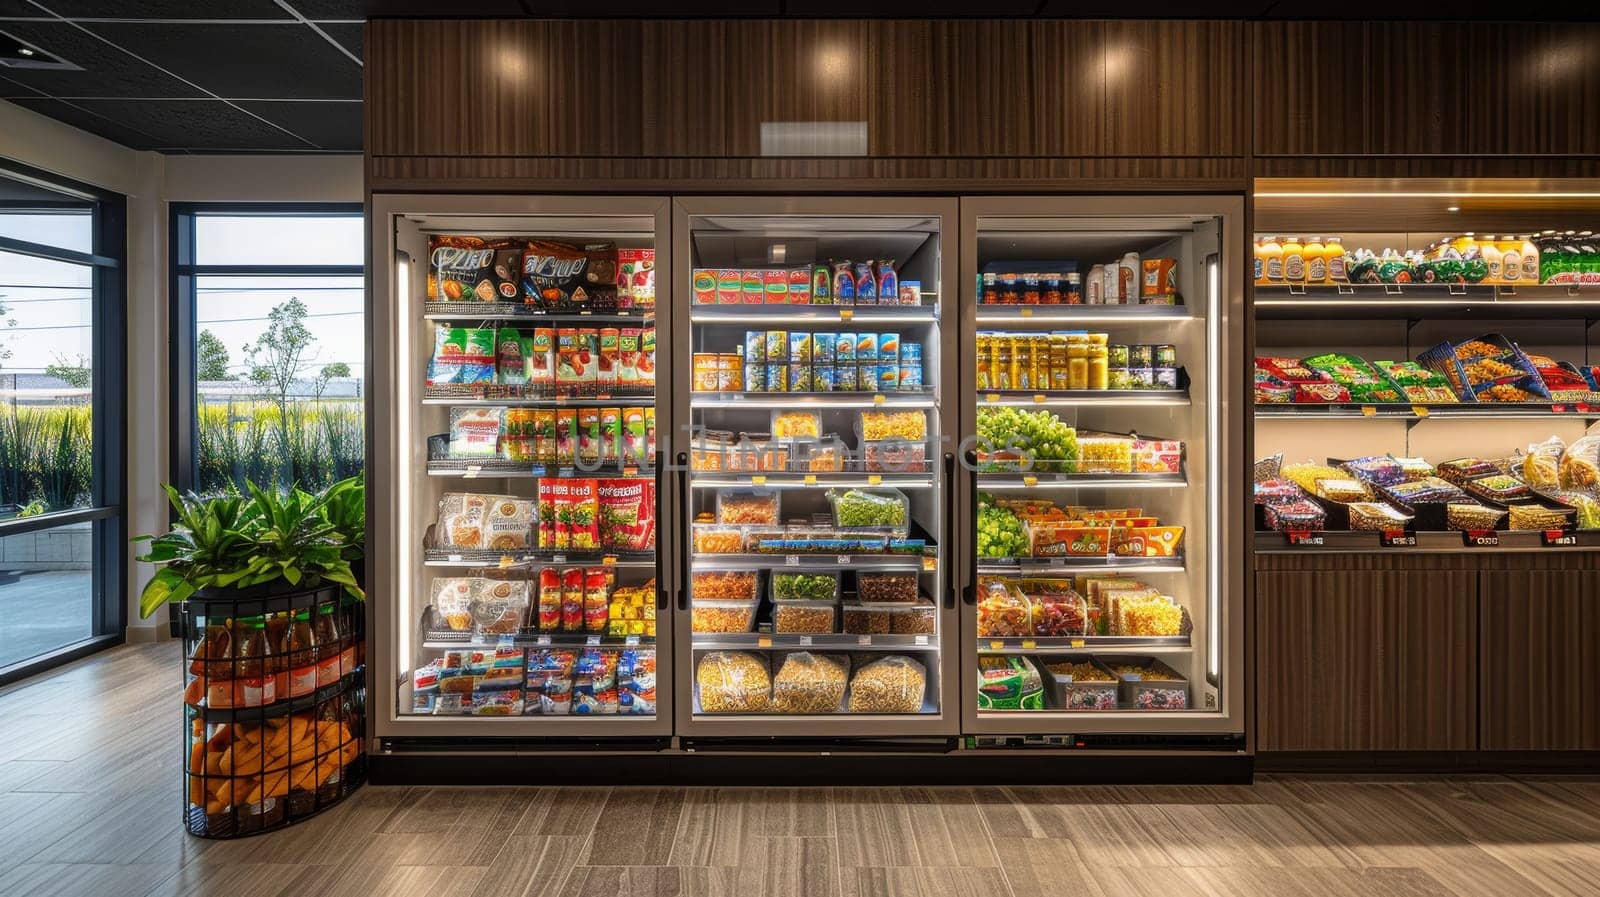 A store with a lot of food and drinks in the freezer section. The store is well lit and has a clean and organized appearance